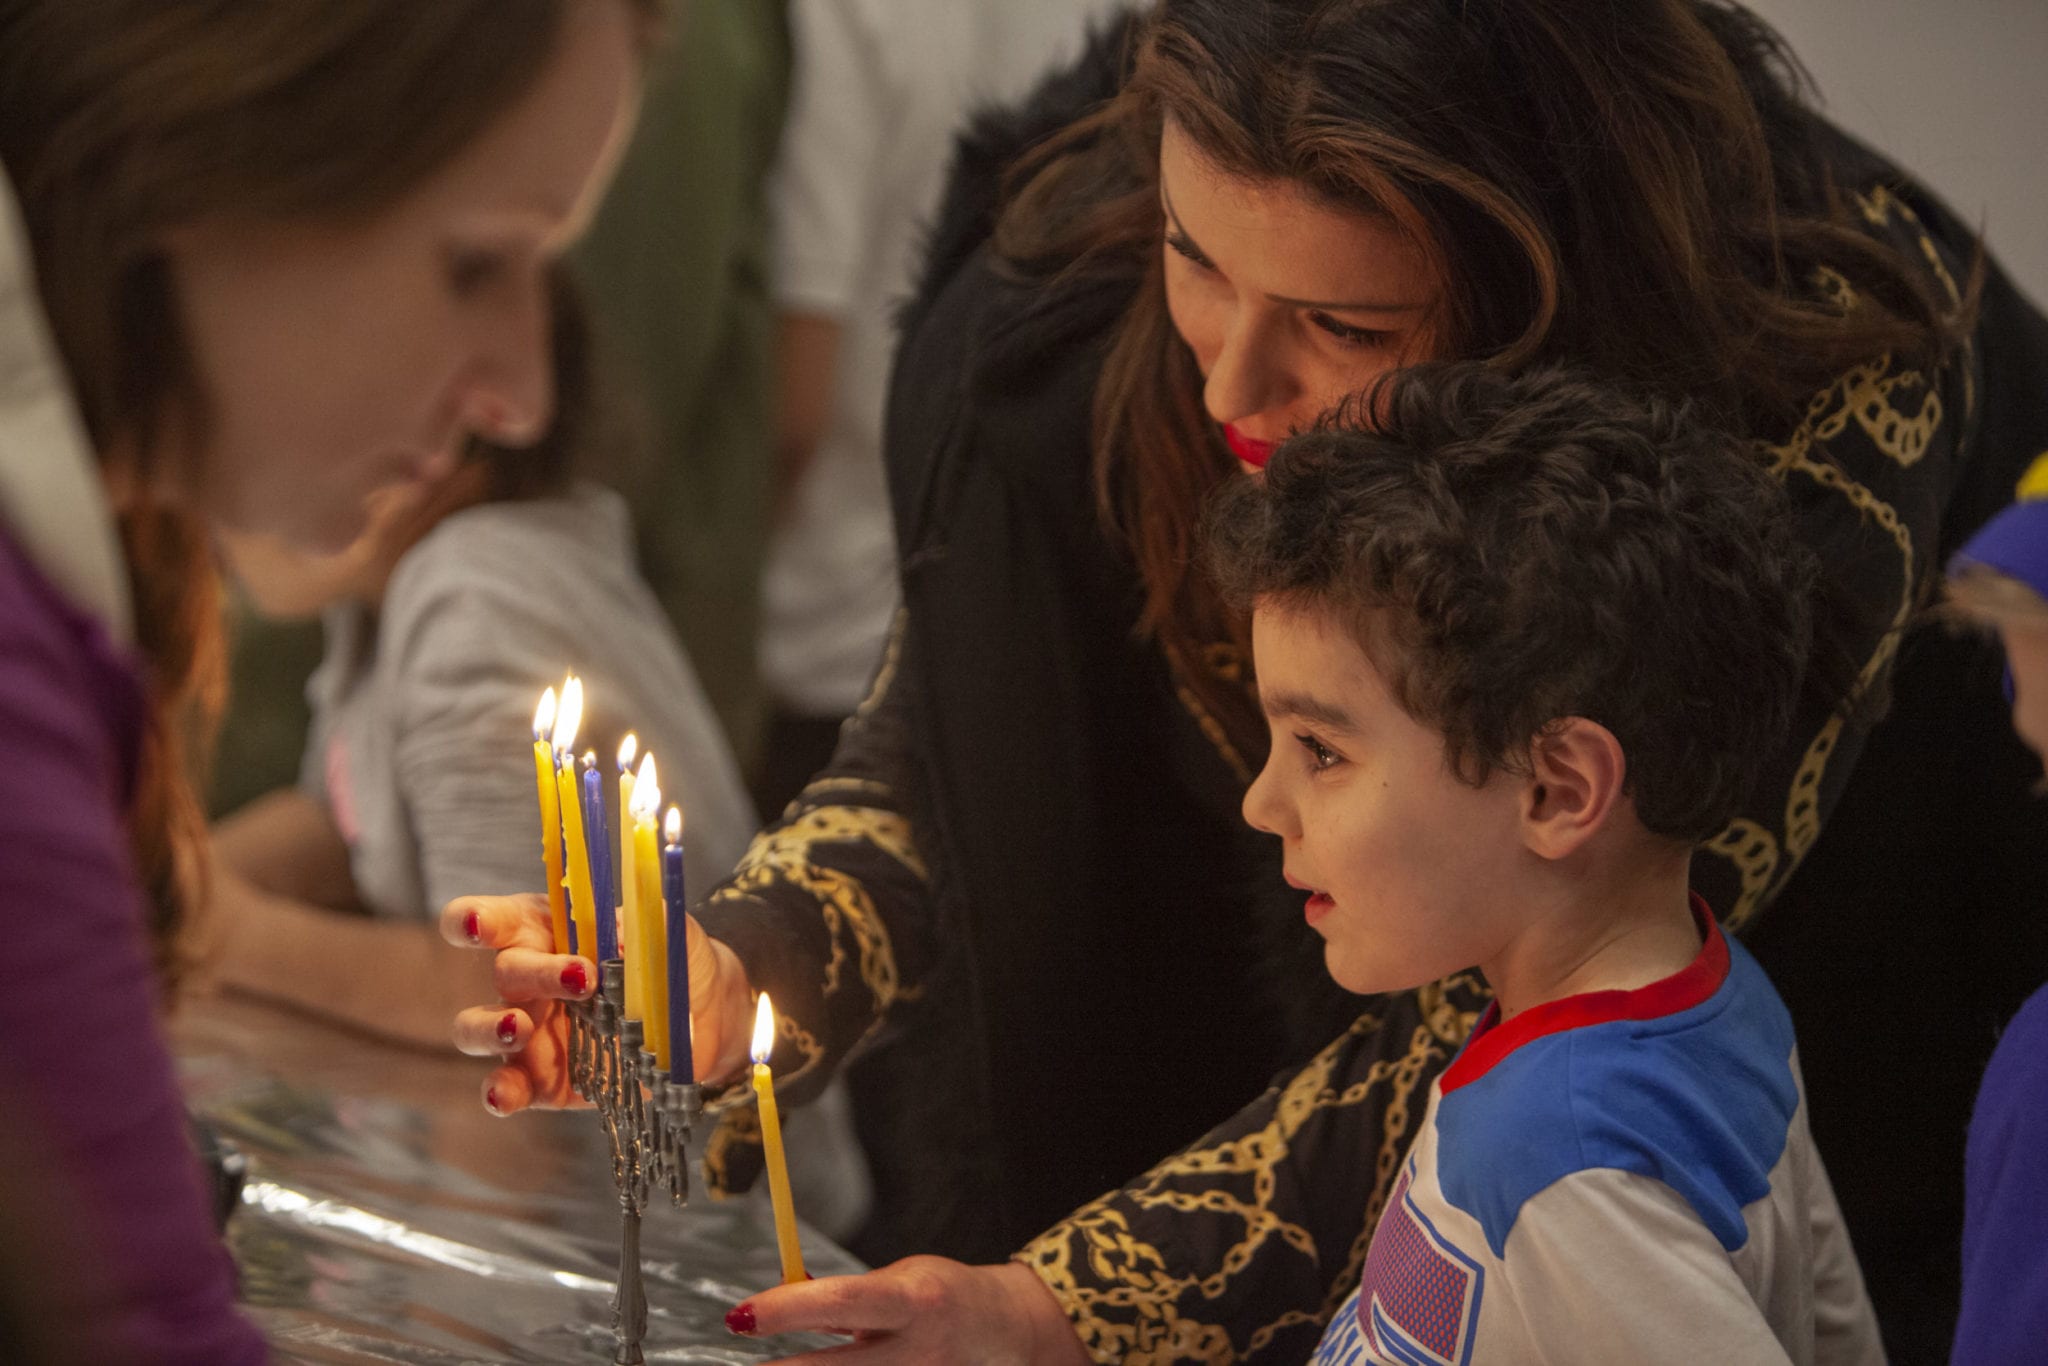 Olgah Goysman and her son Ari light the candles of their family menorah during the children’s Hanukkah festival at Chabad Jewish Center on Dec 9. Photo by Jacob Granneman